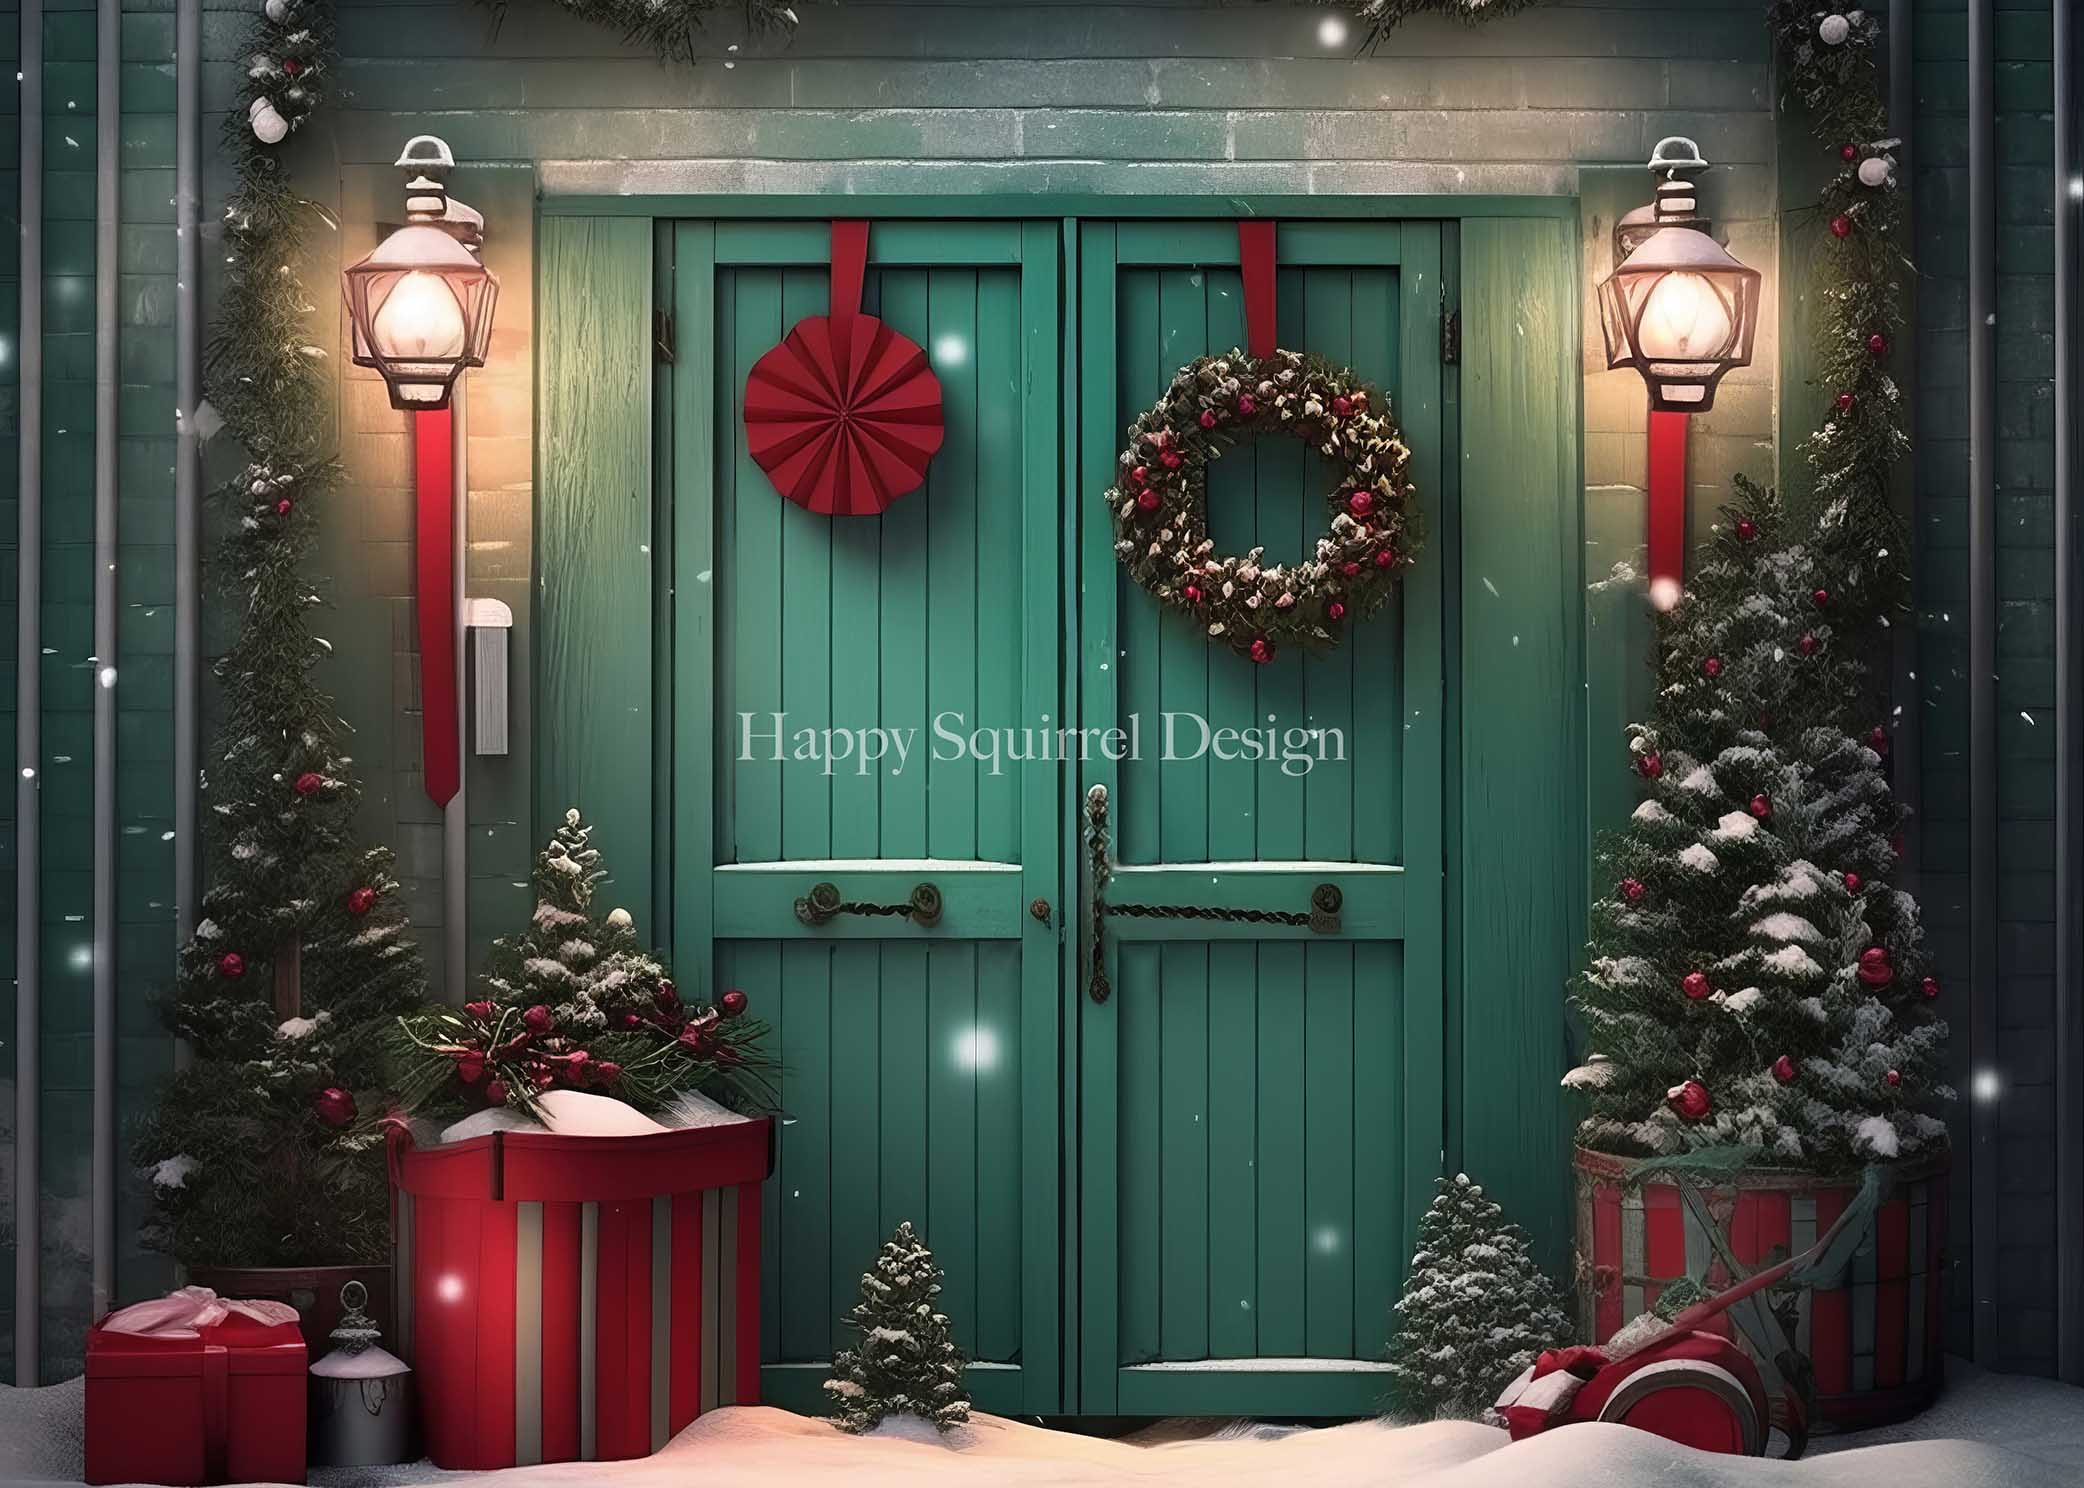 Kate Christmas Green Holiday Door Backdrop Designed by Happy Squirrel Design